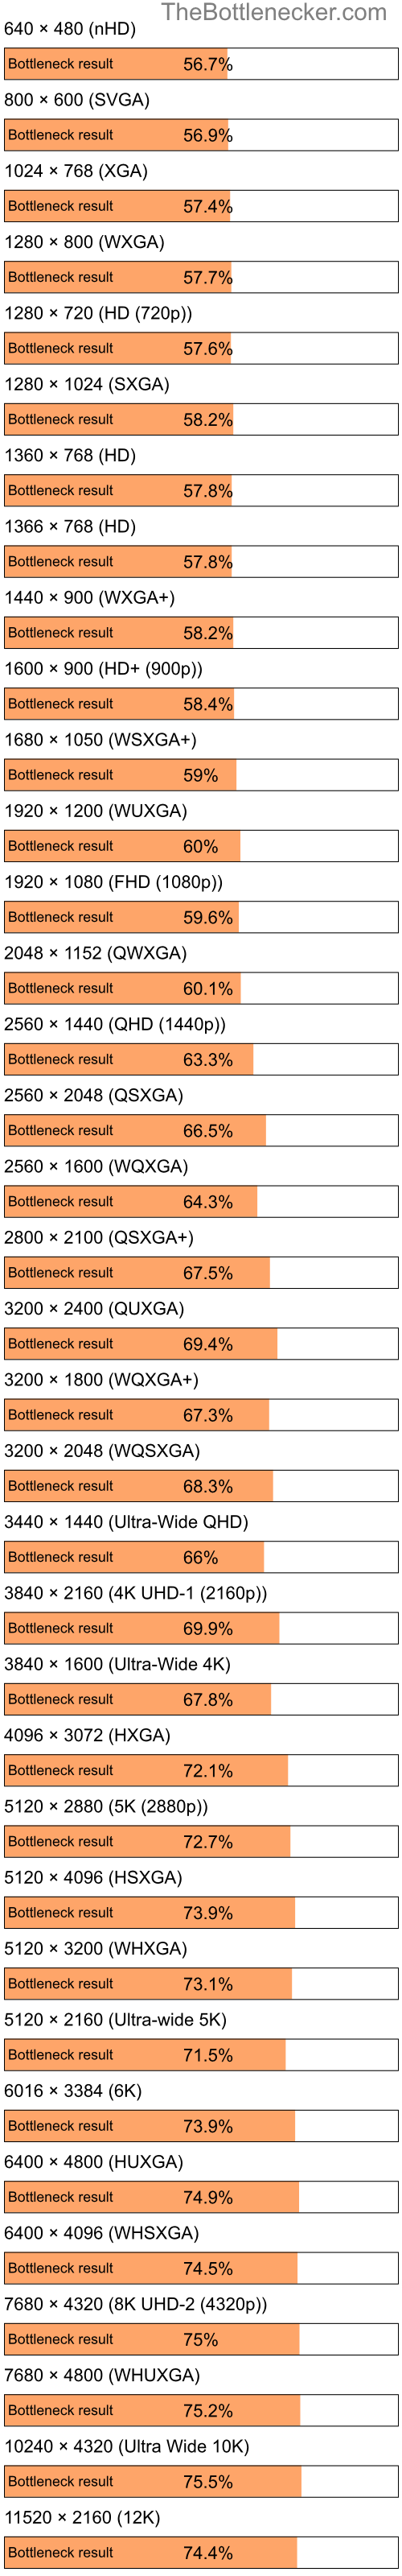 Bottleneck results by resolution for Intel Celeron and NVIDIA Quadro NVS 150M in Processor Intense Tasks